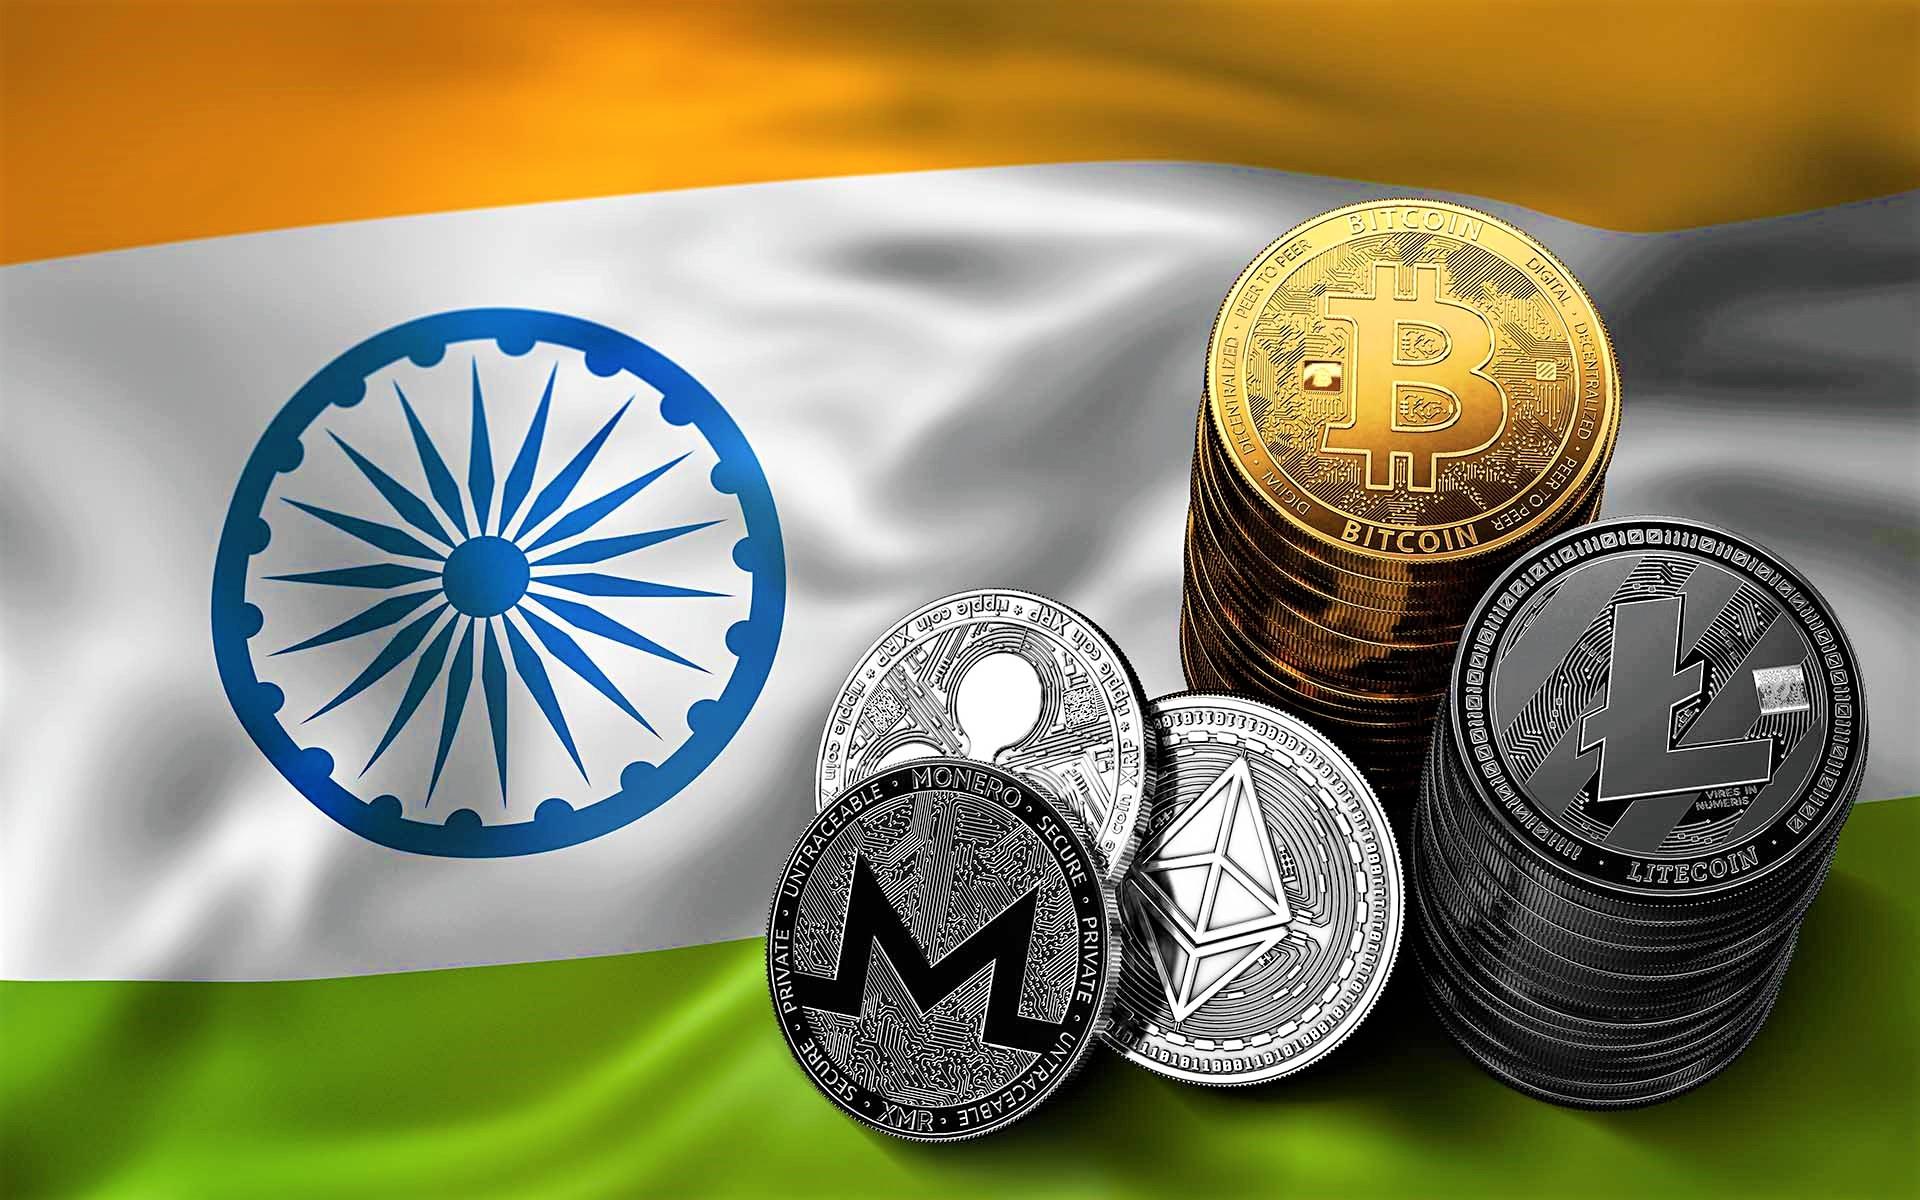 Indian Economic Offences Wing Warns Public Against Digital Currencies